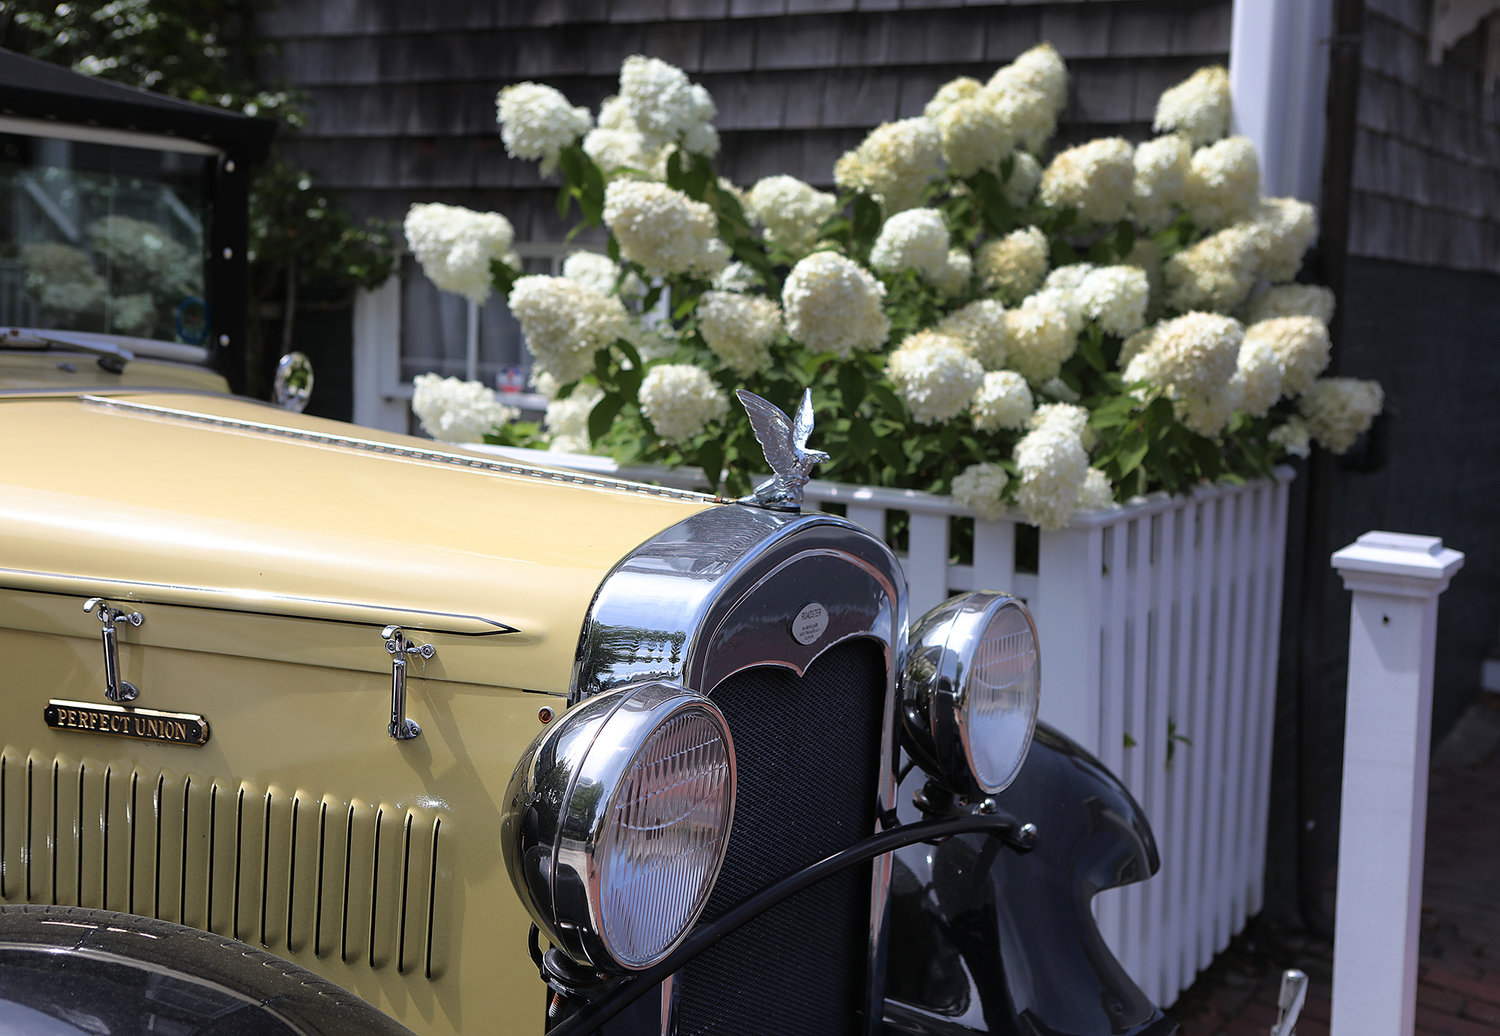 A classic car and hydrangeas at a home on Union Street.